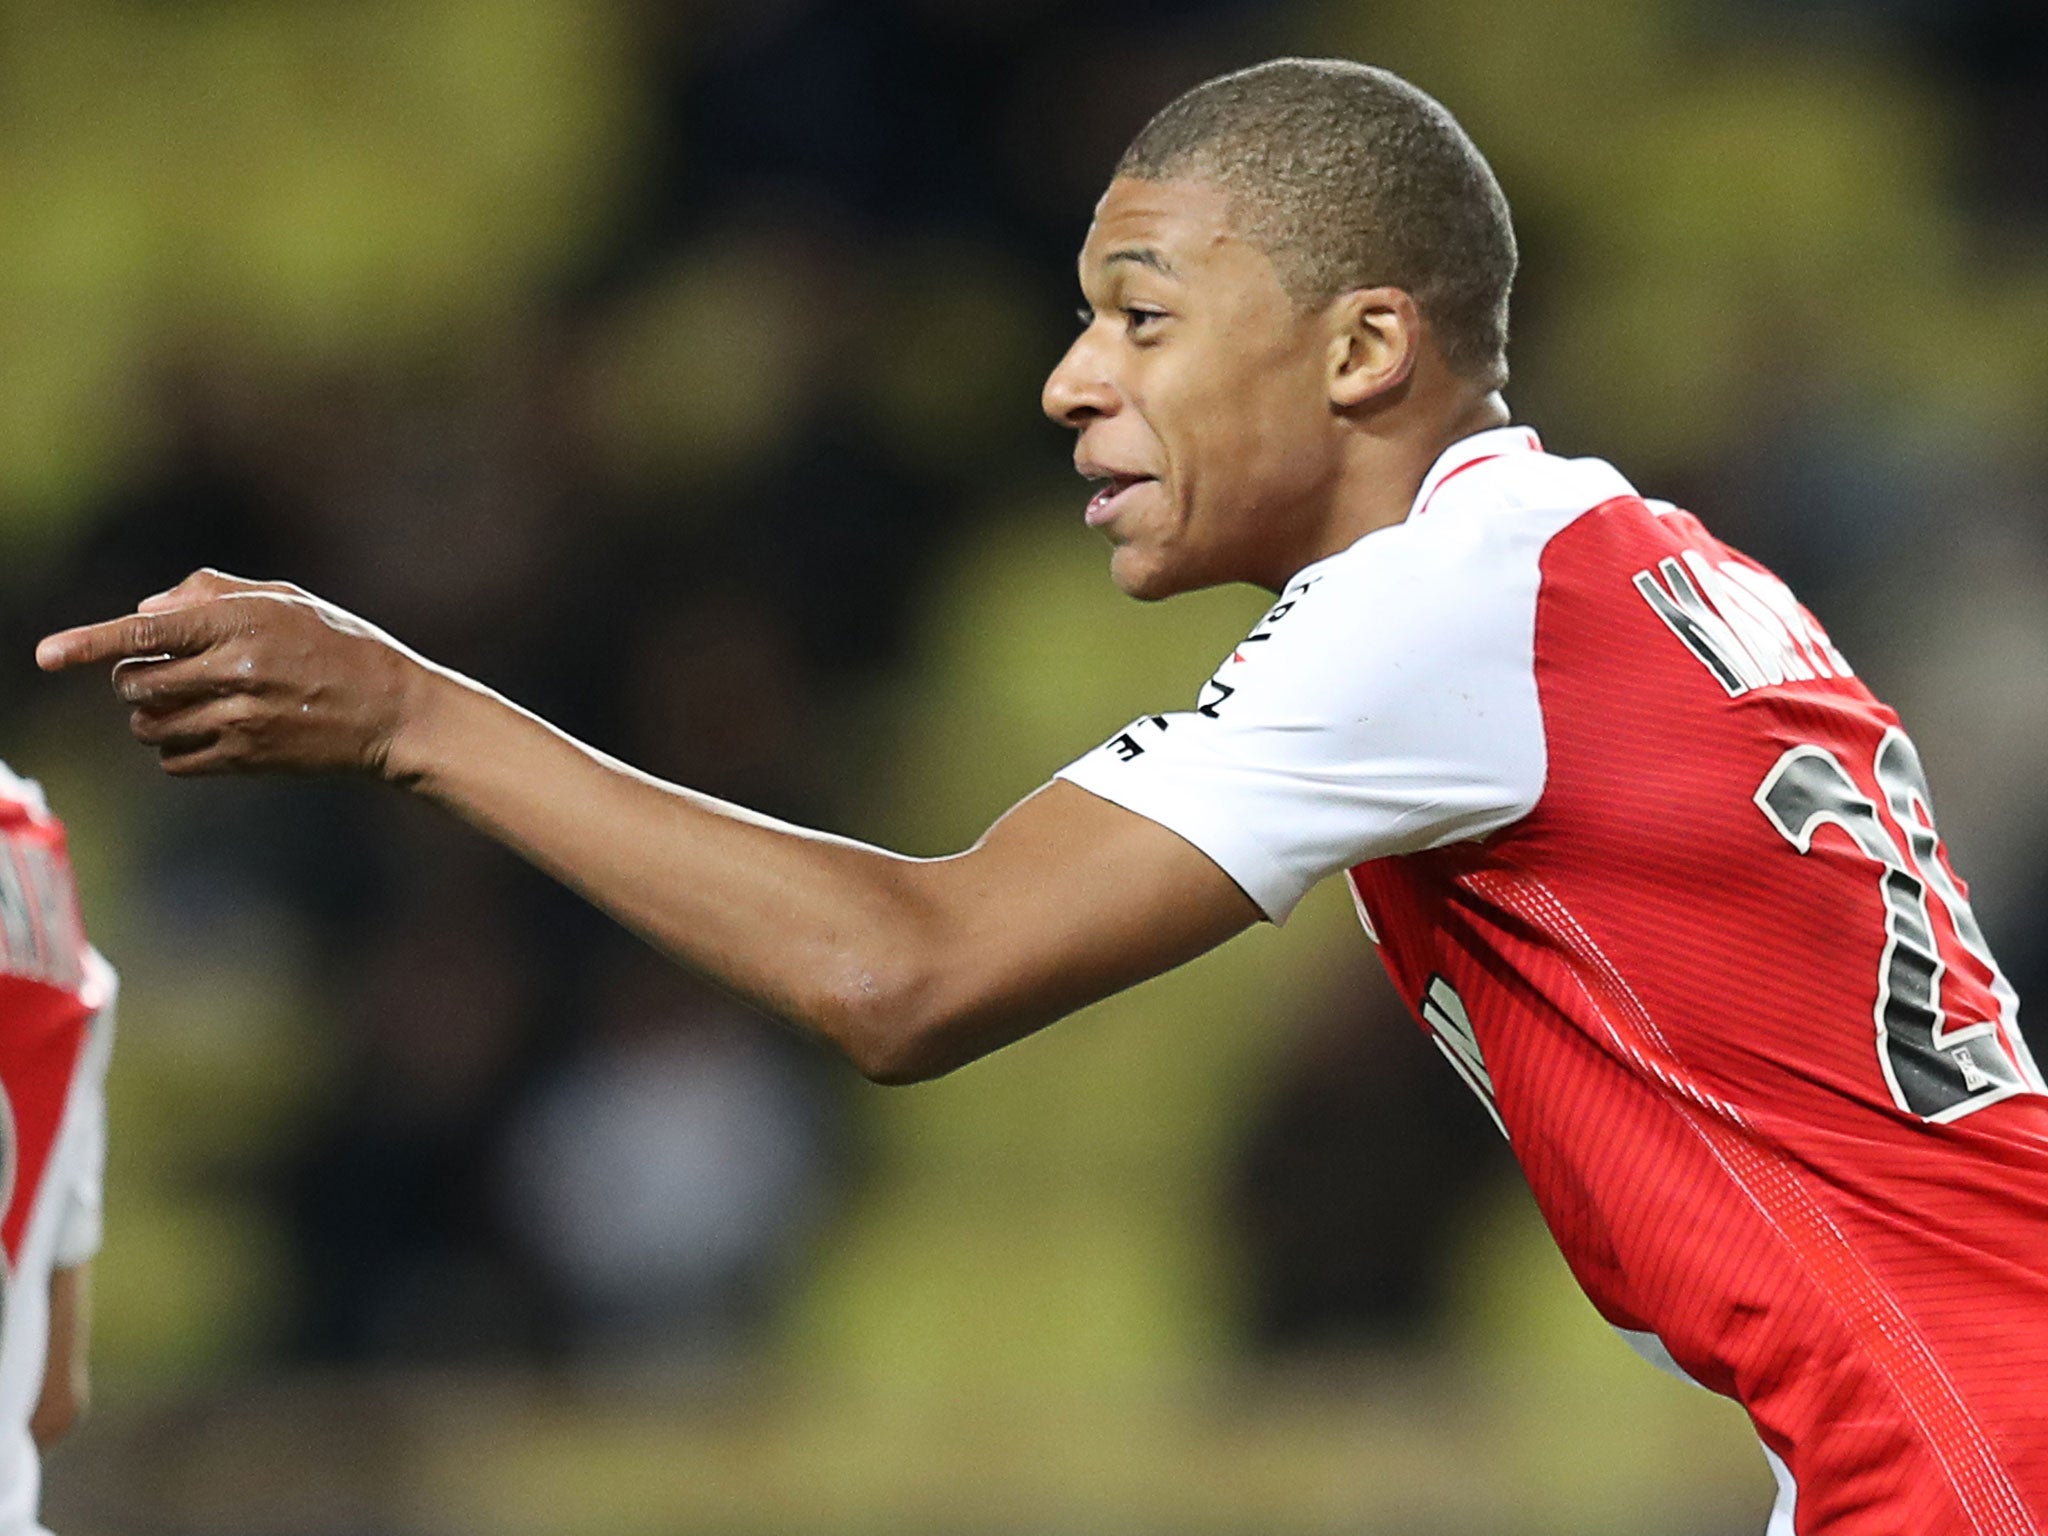 Kylian Mbappe has risen to prominence at Monaco